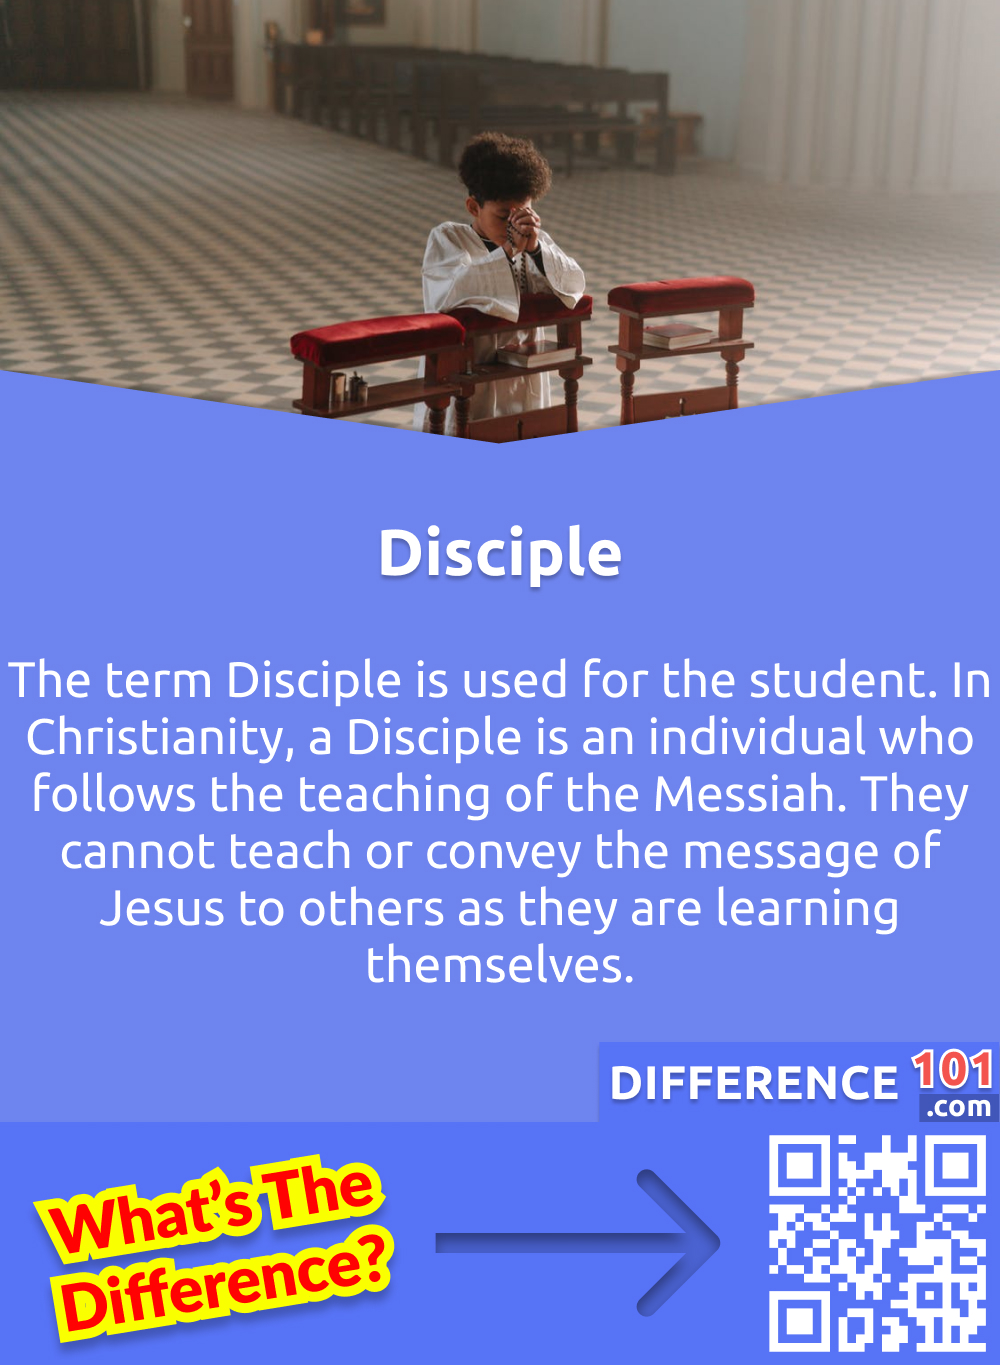 What Is a Disciple? The term Disciple is used for the student. In Christianity, a Disciple is an individual who follows the teaching of the Messiah. They cannot teach or convey the message of Jesus to others as they are learning themselves.